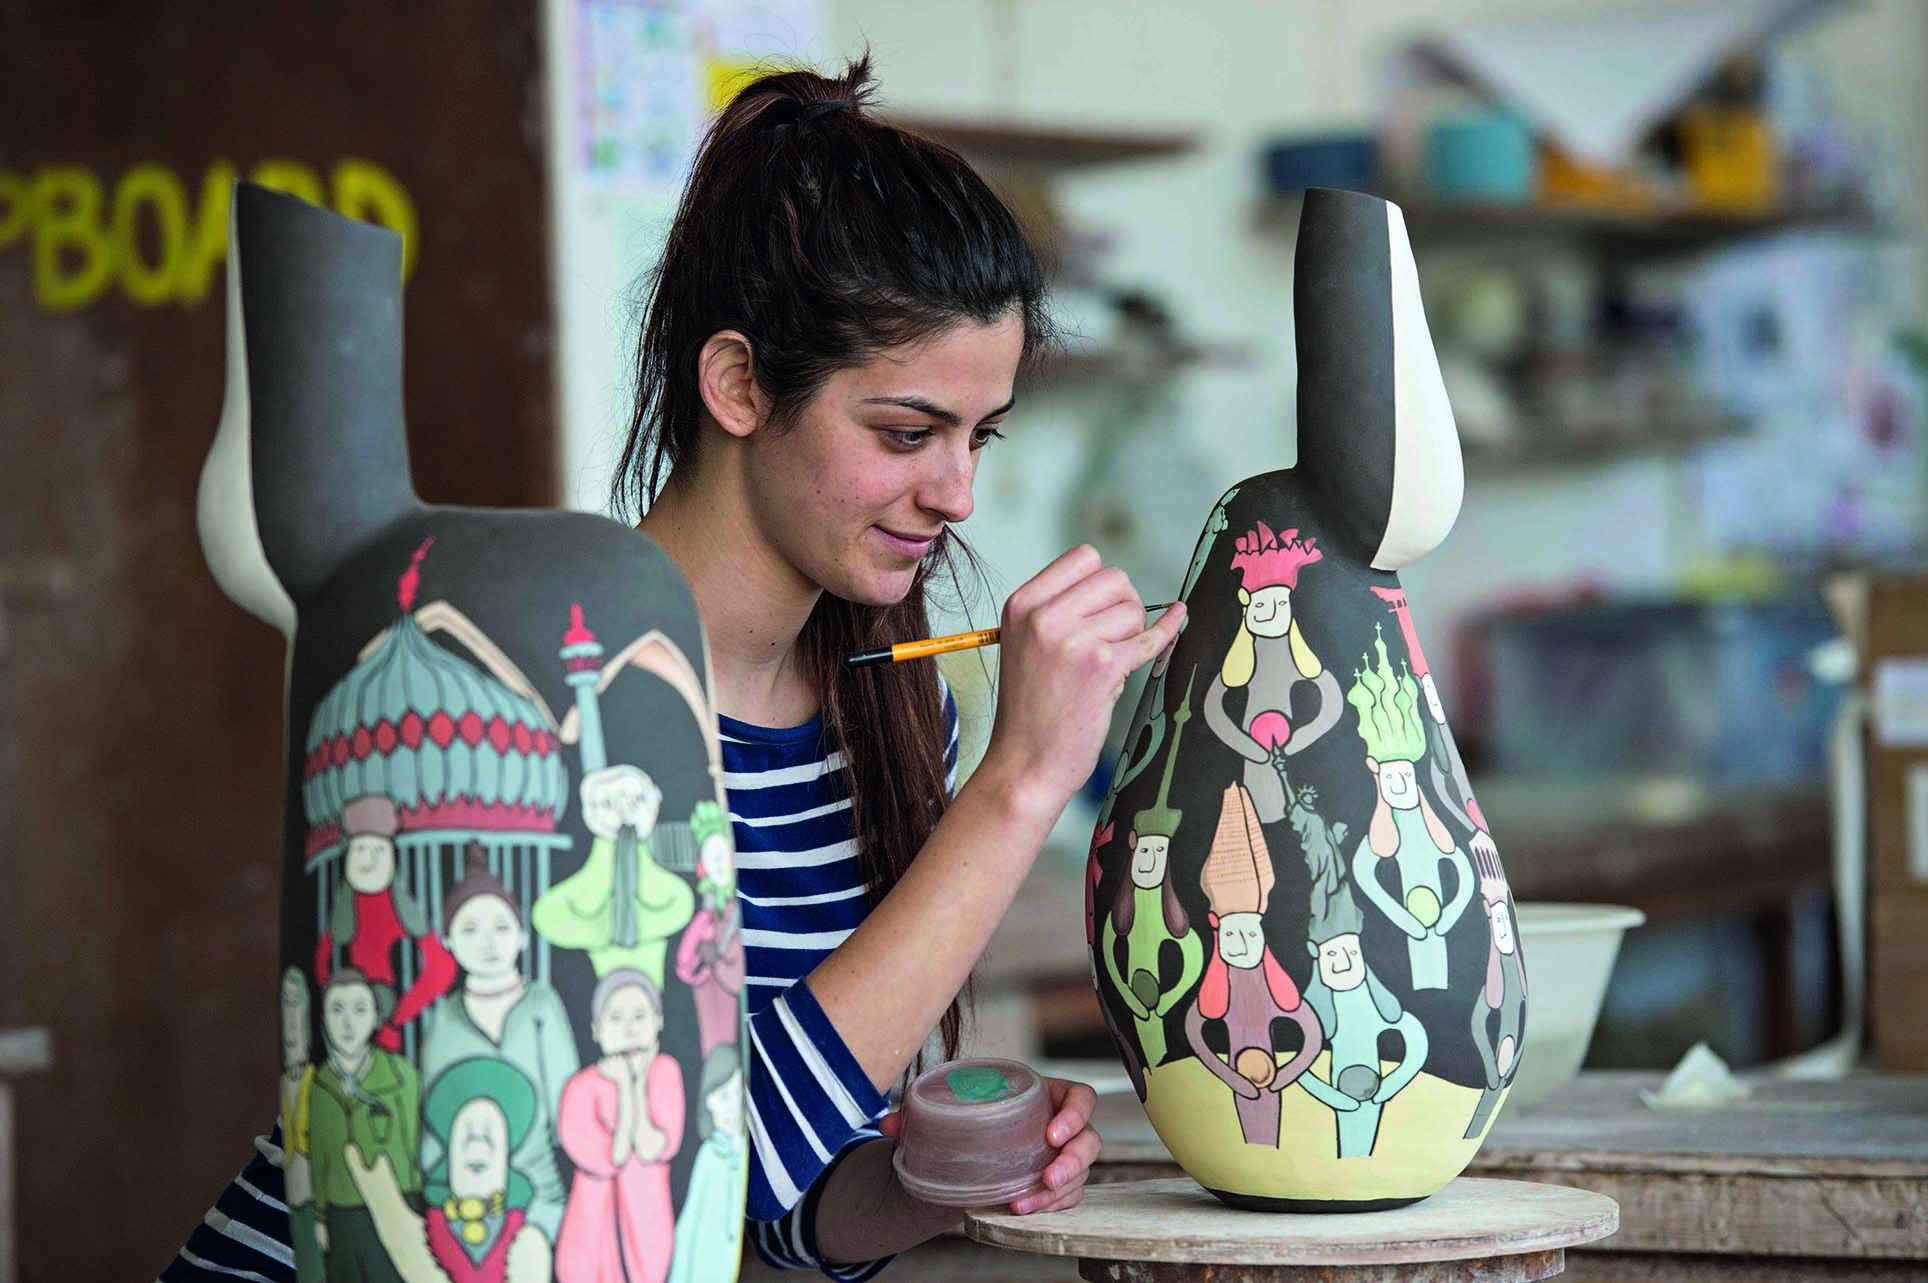 A student painting pottery in class at the University of Brighton in Brighton, England.